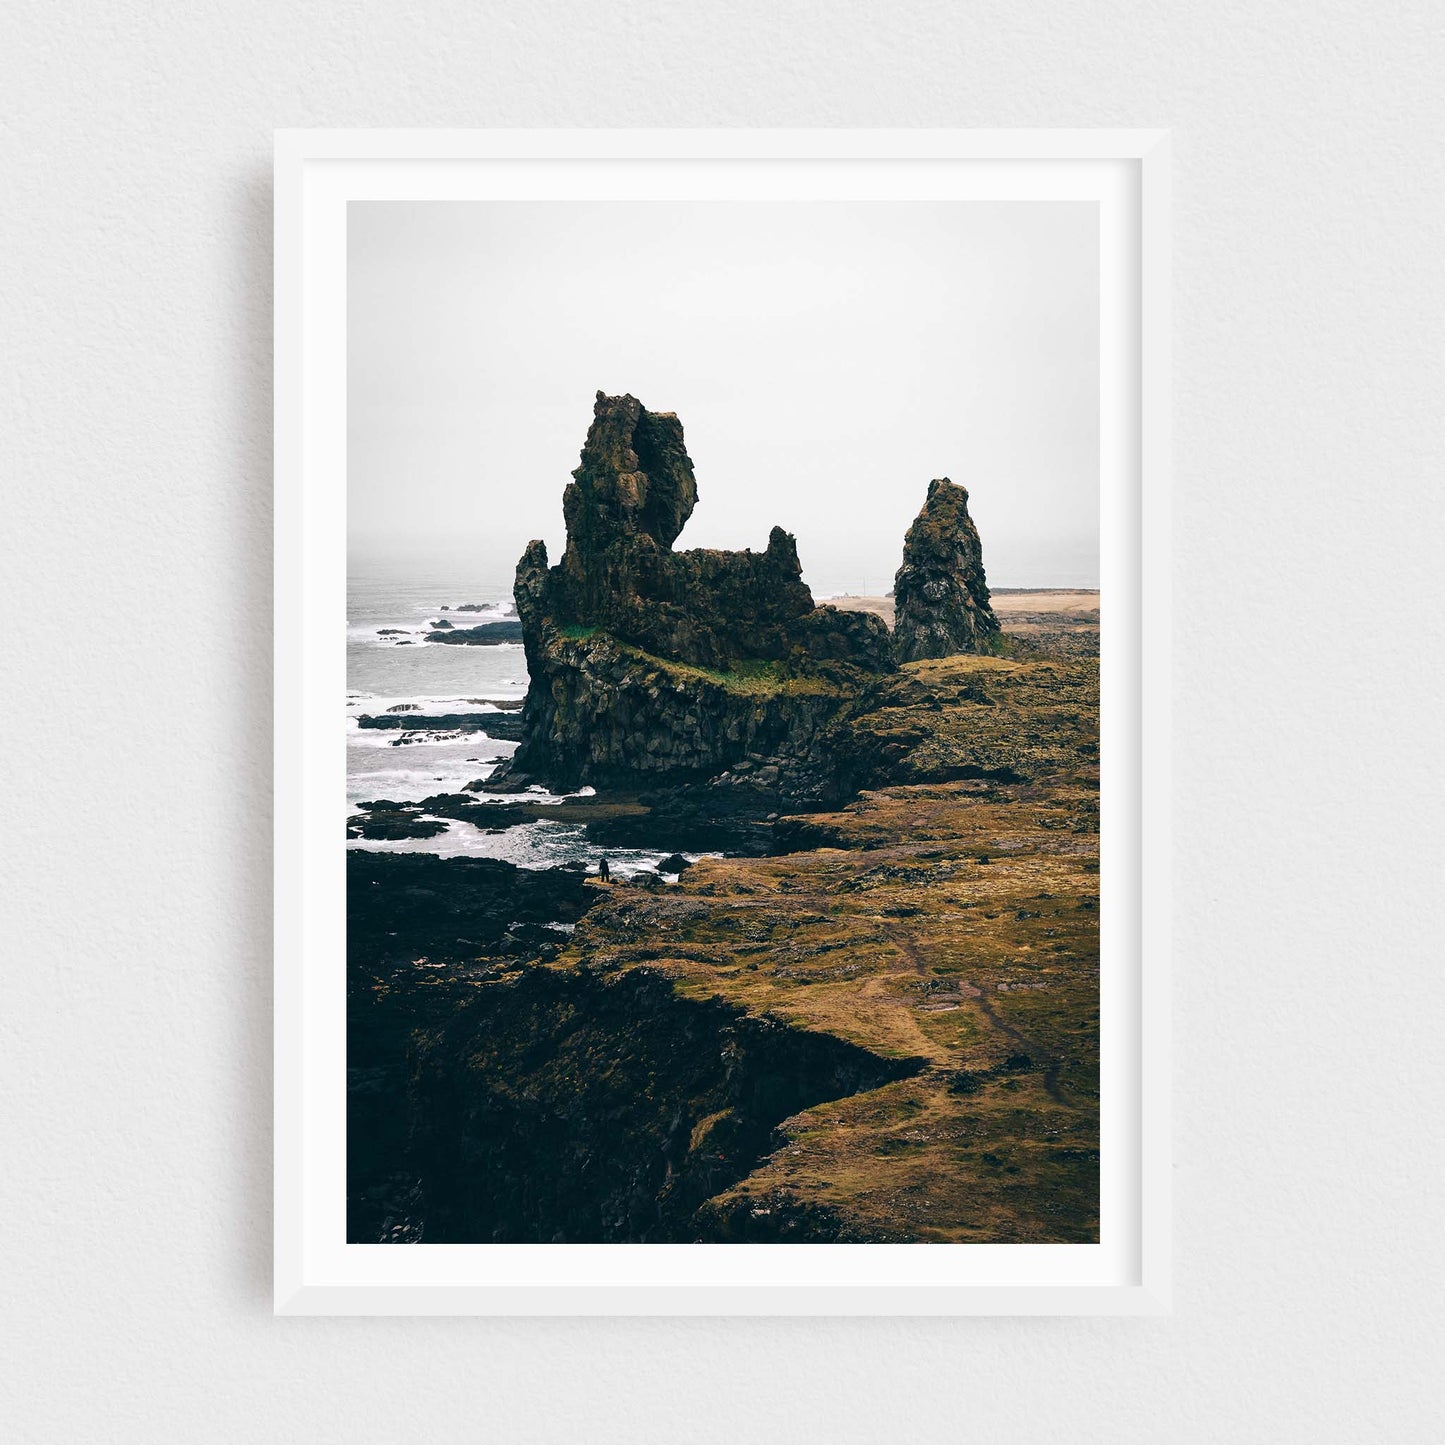 Iceland fine art photography print featuring Londrangar rock formations, in a white frame